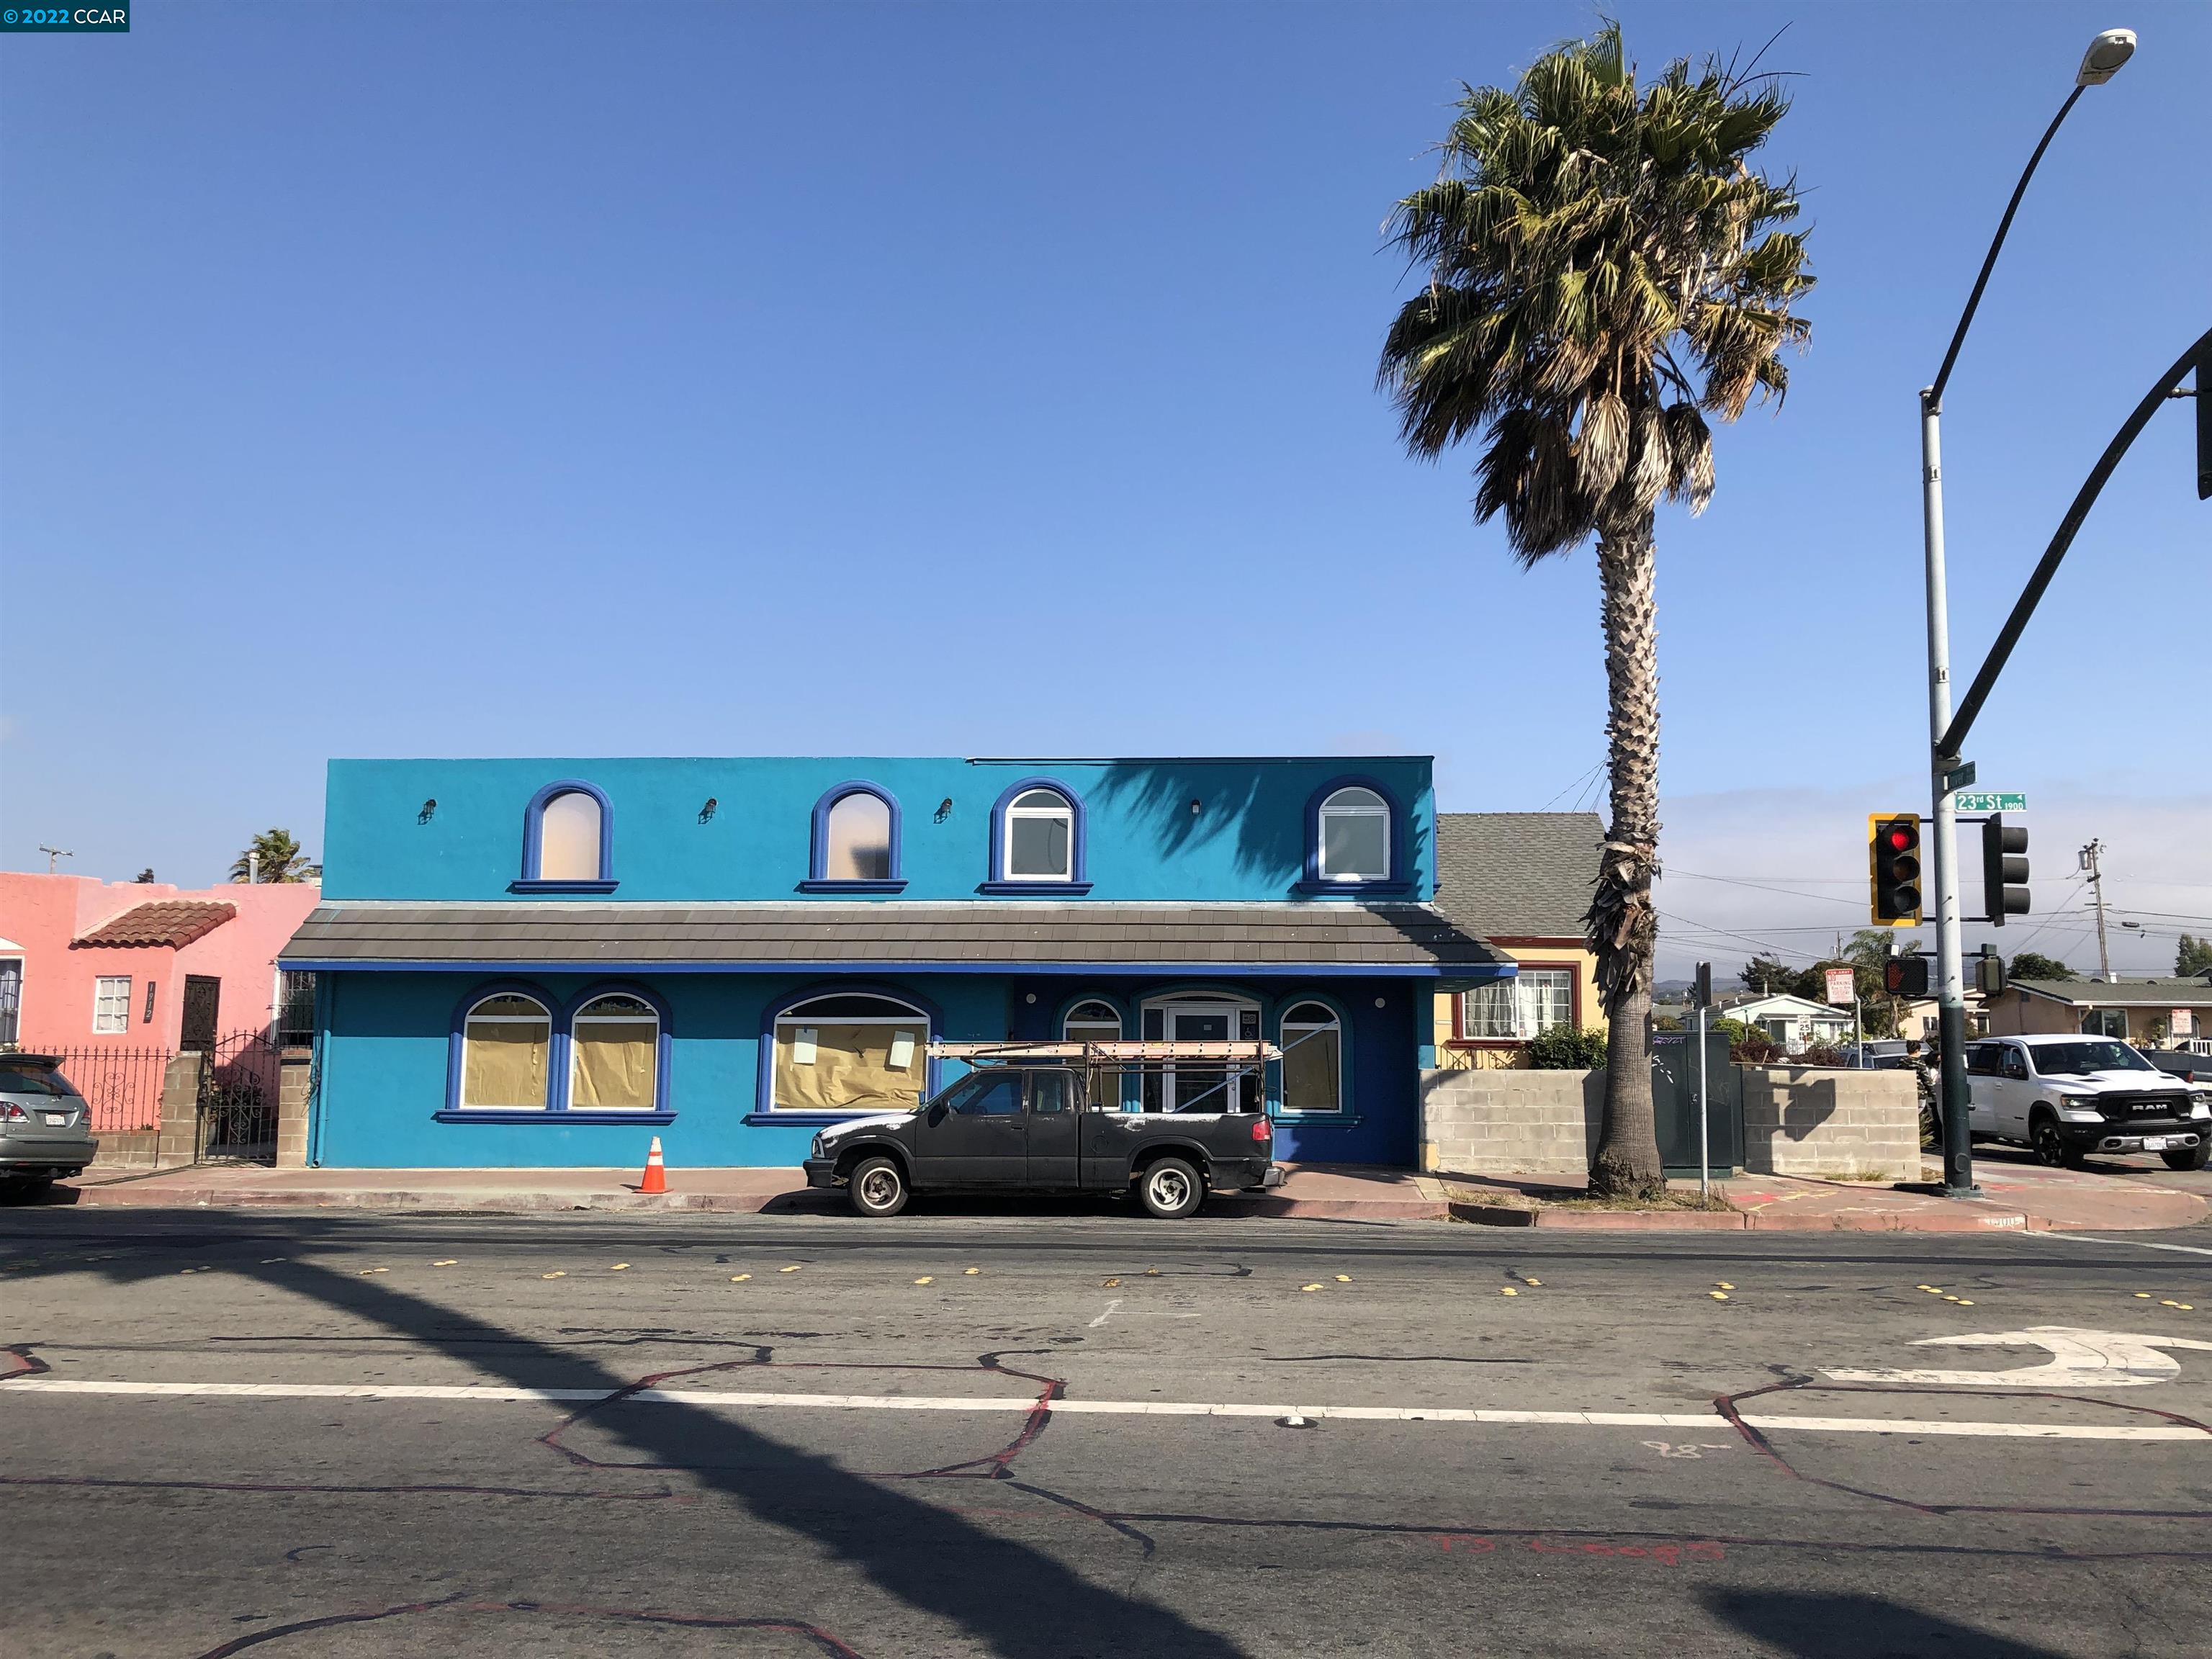 Sale include 1900 23rd st remodeled doughnut shop set up with kitchen, bathroom, storage & office located in front of the property along 23rd st (Vacant). At the rear of the shop facing Dover st is the Renovated home 2 bedrooms & 2 Baths.